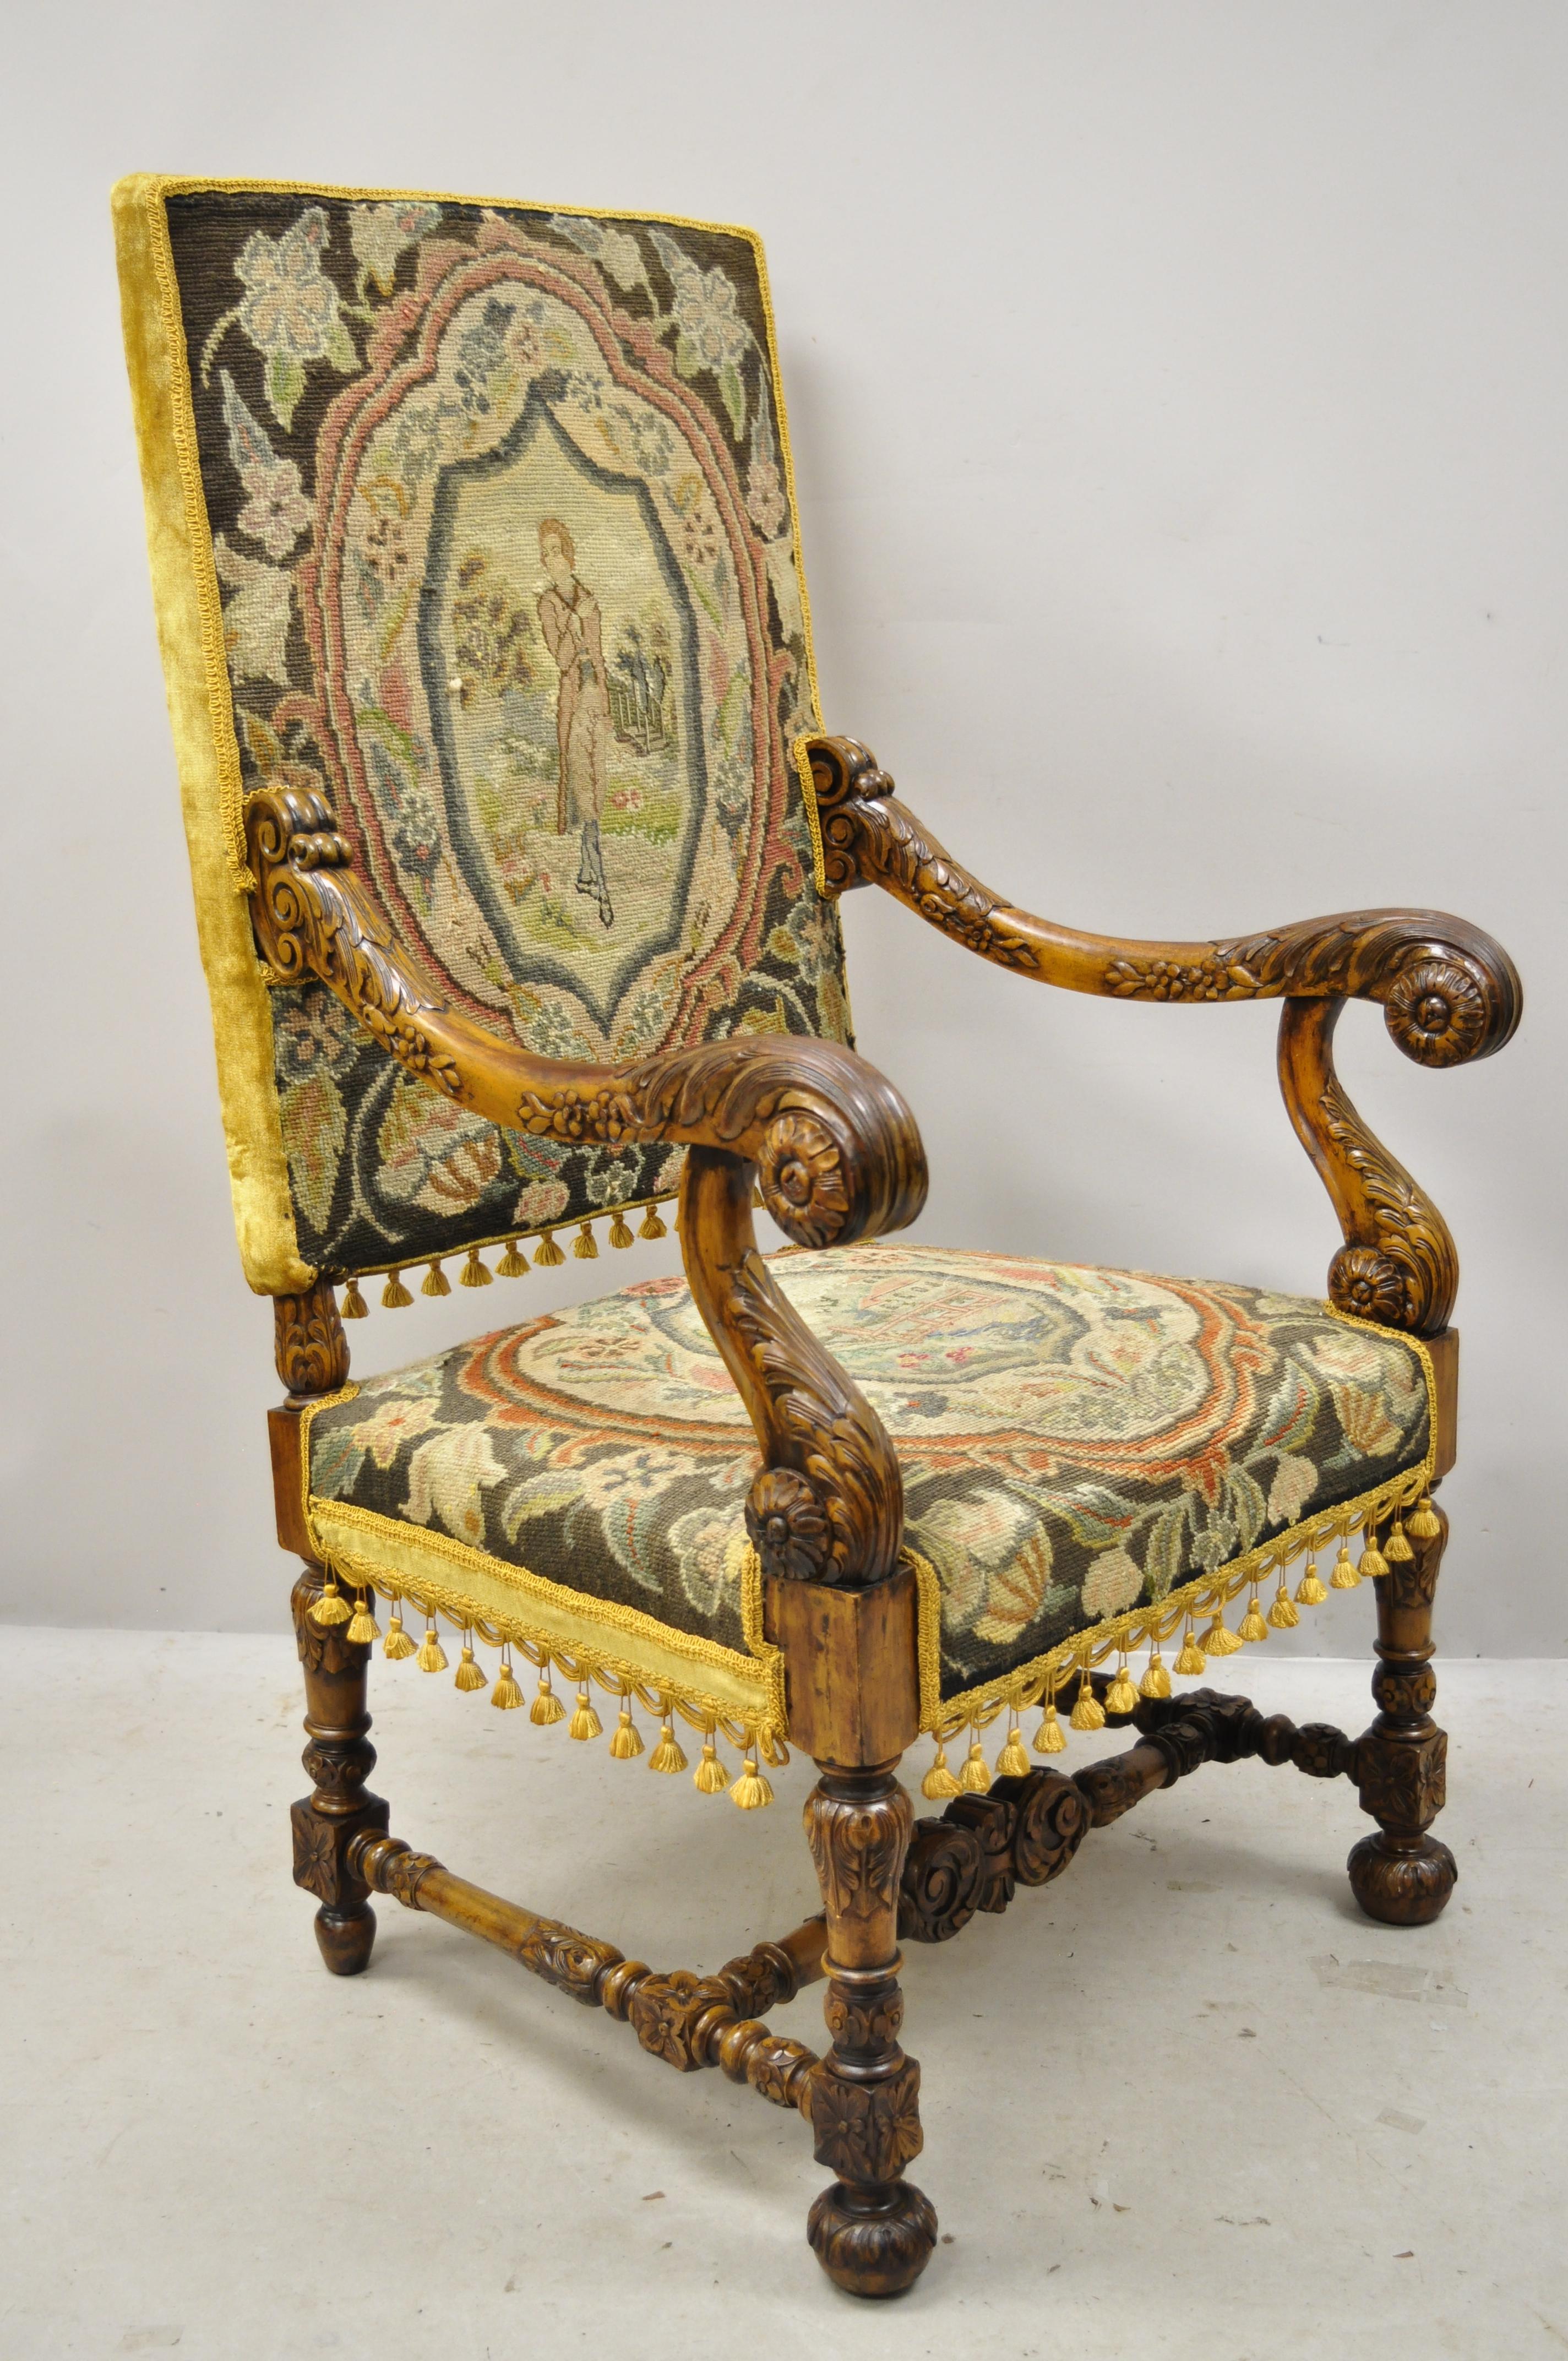 19th century antique Italian Renaissance carved walnut figural needlepoint yellow throne armchair. Item features figural needlepoint back and seat, flower and scroll work carved frame, tall stately back, solid wood construction, finely carved